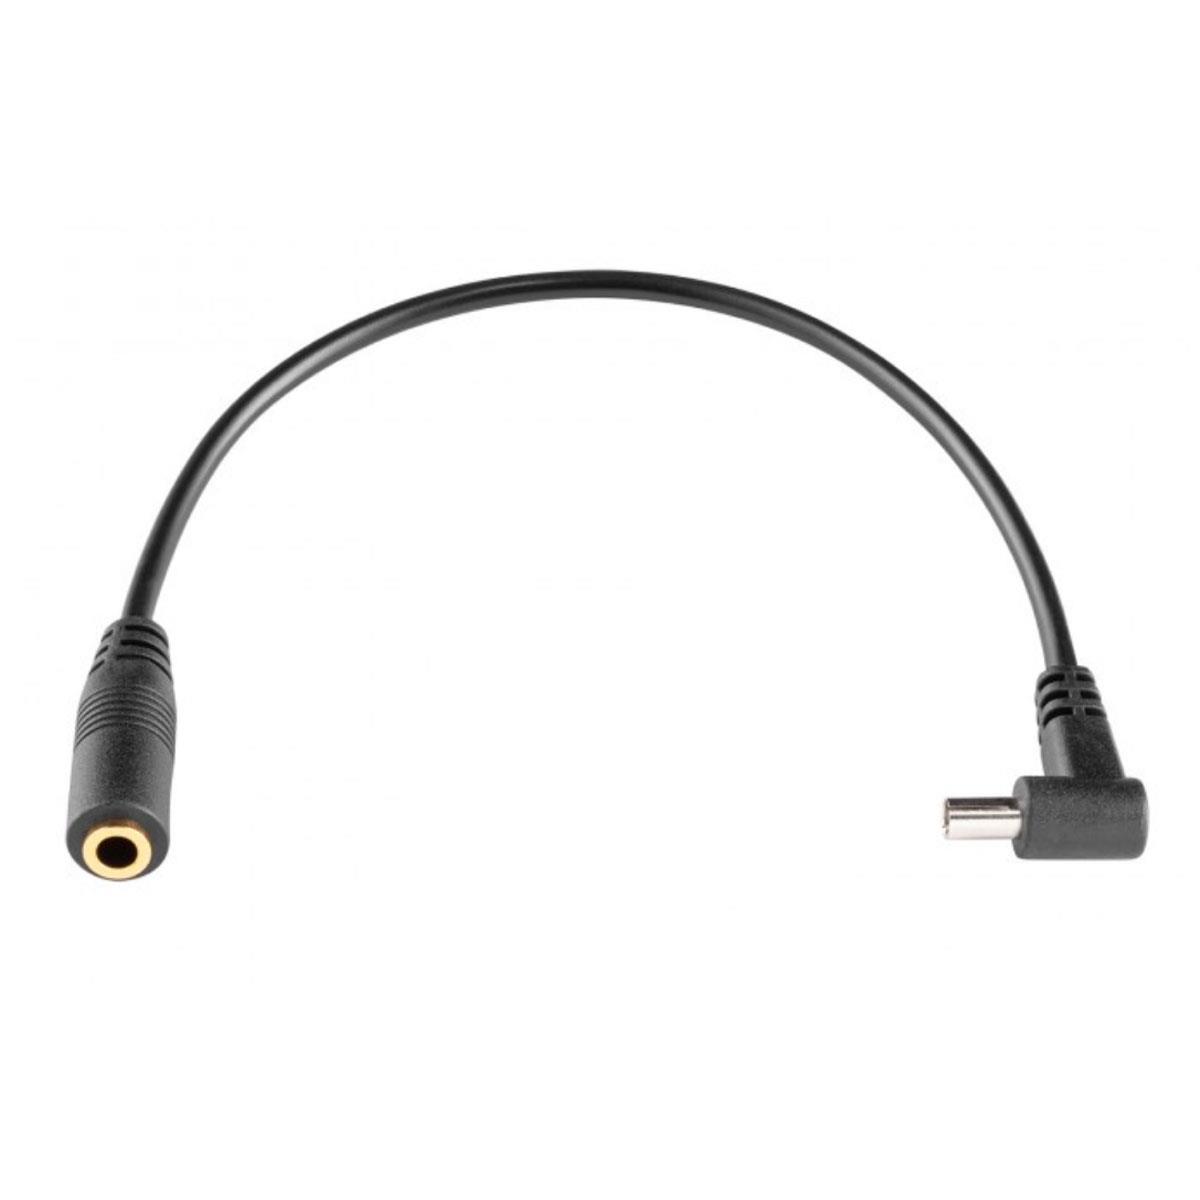 Image of Westcott PC Sync Male to Female Mini 3.5mm Cable